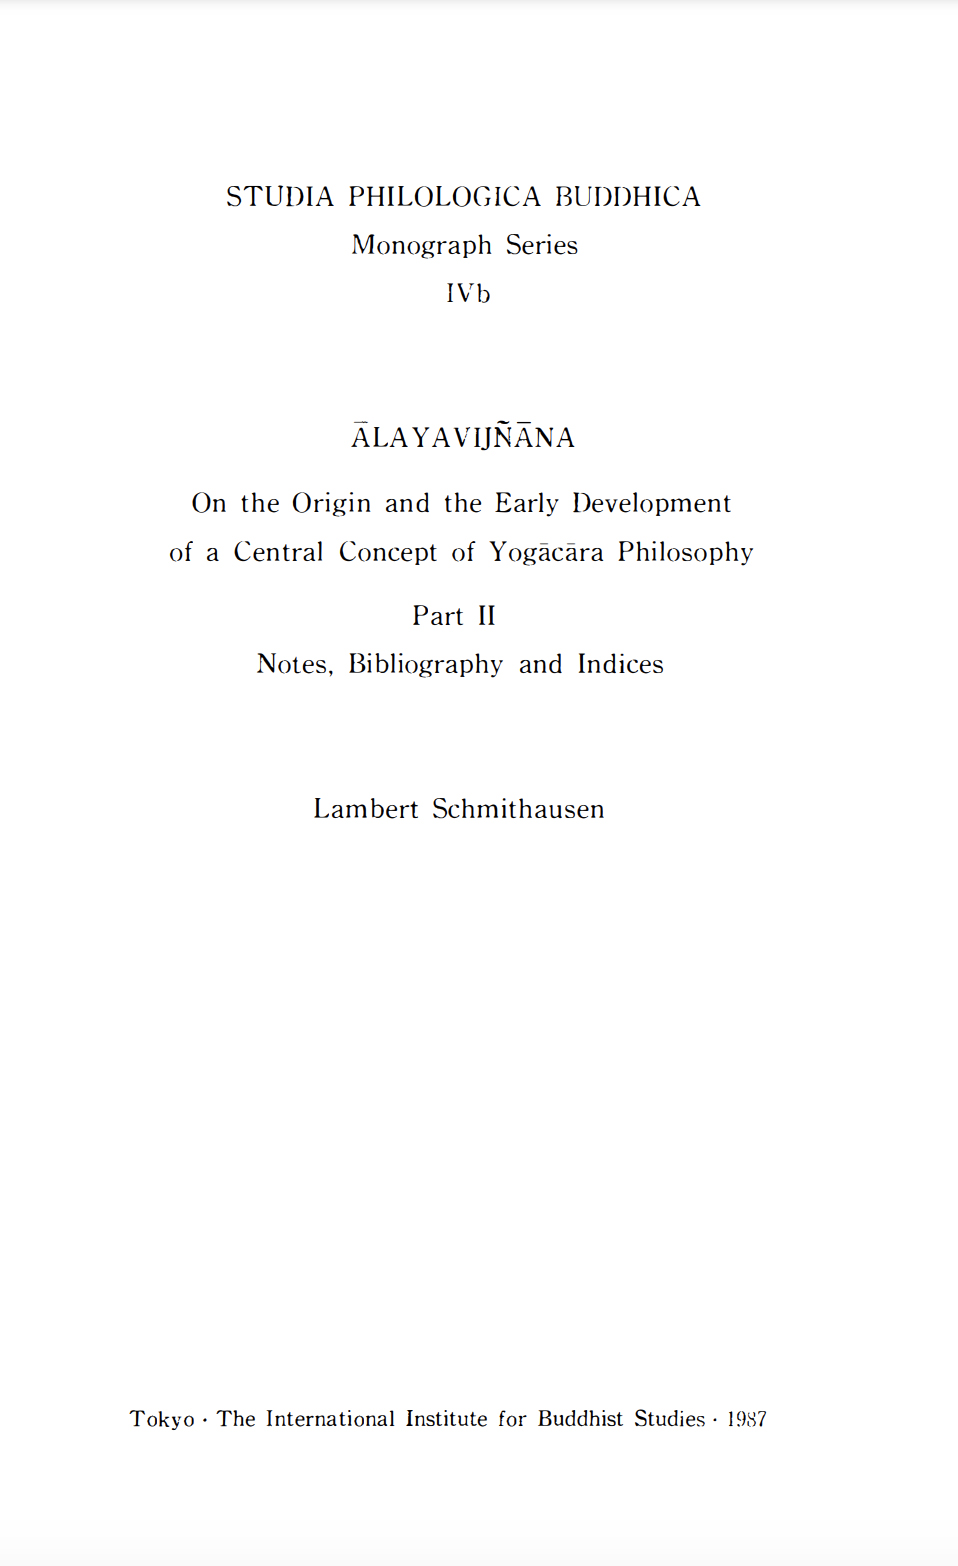 Ālayavijñāna On the Origin and the Early Development of a Central Concept of Yogācāra Philosophy Part 2 Notes Bibliography and Indices-front.jpg